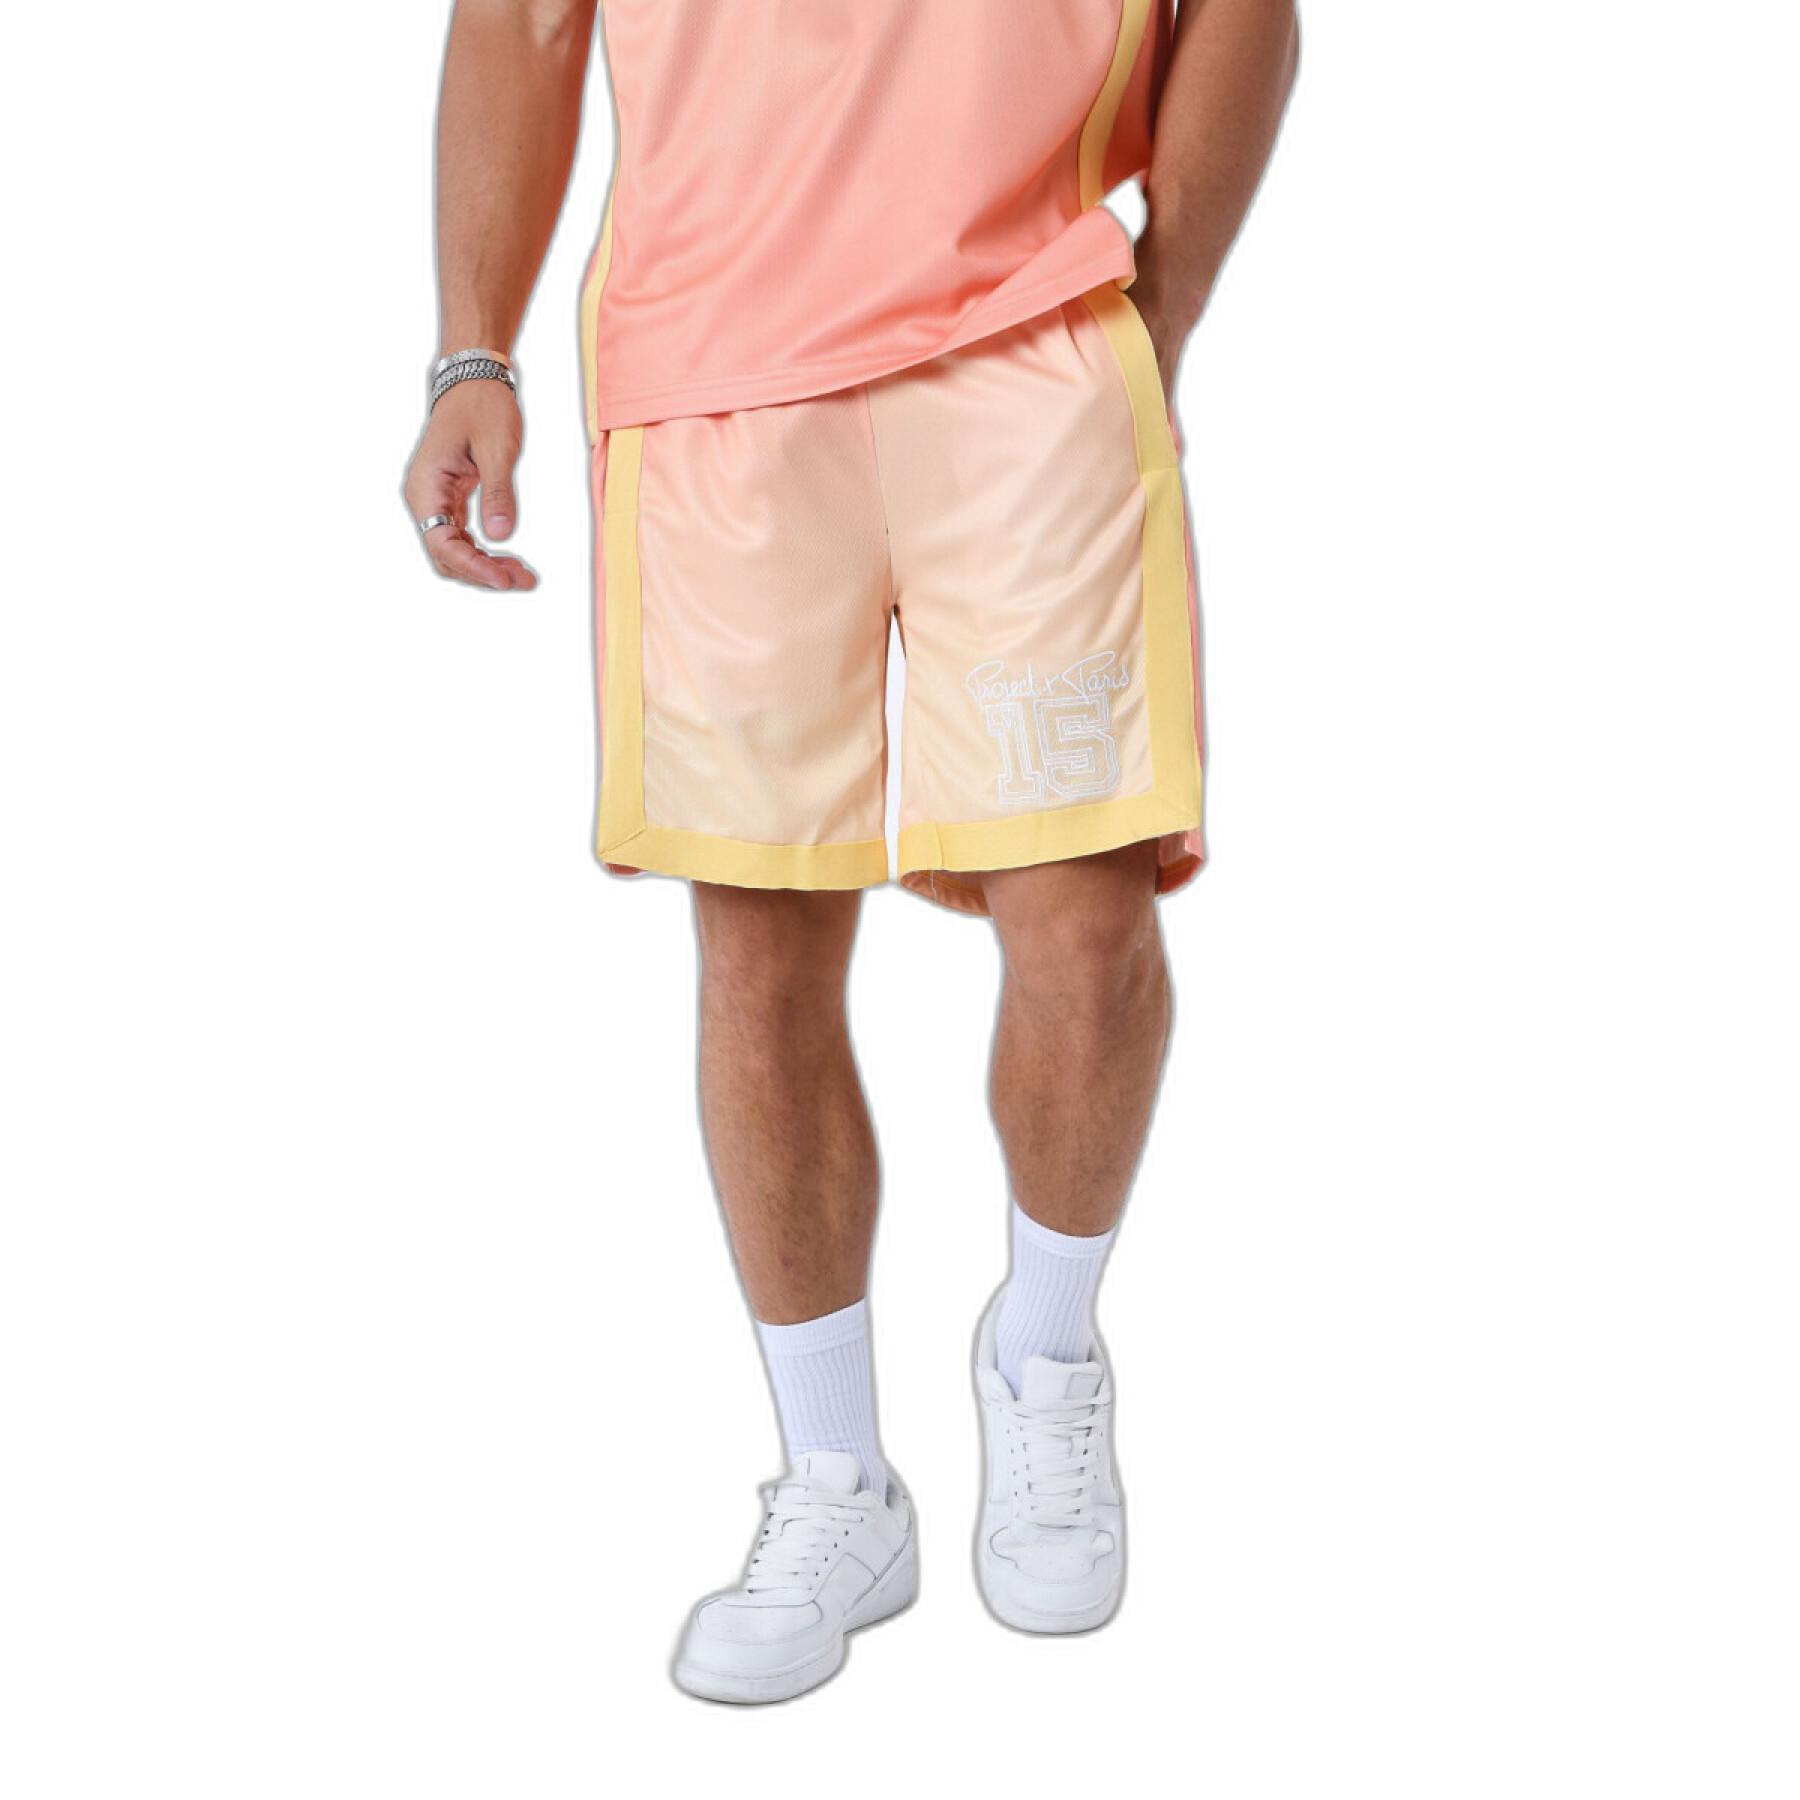 Basketball style shorts Project X Paris